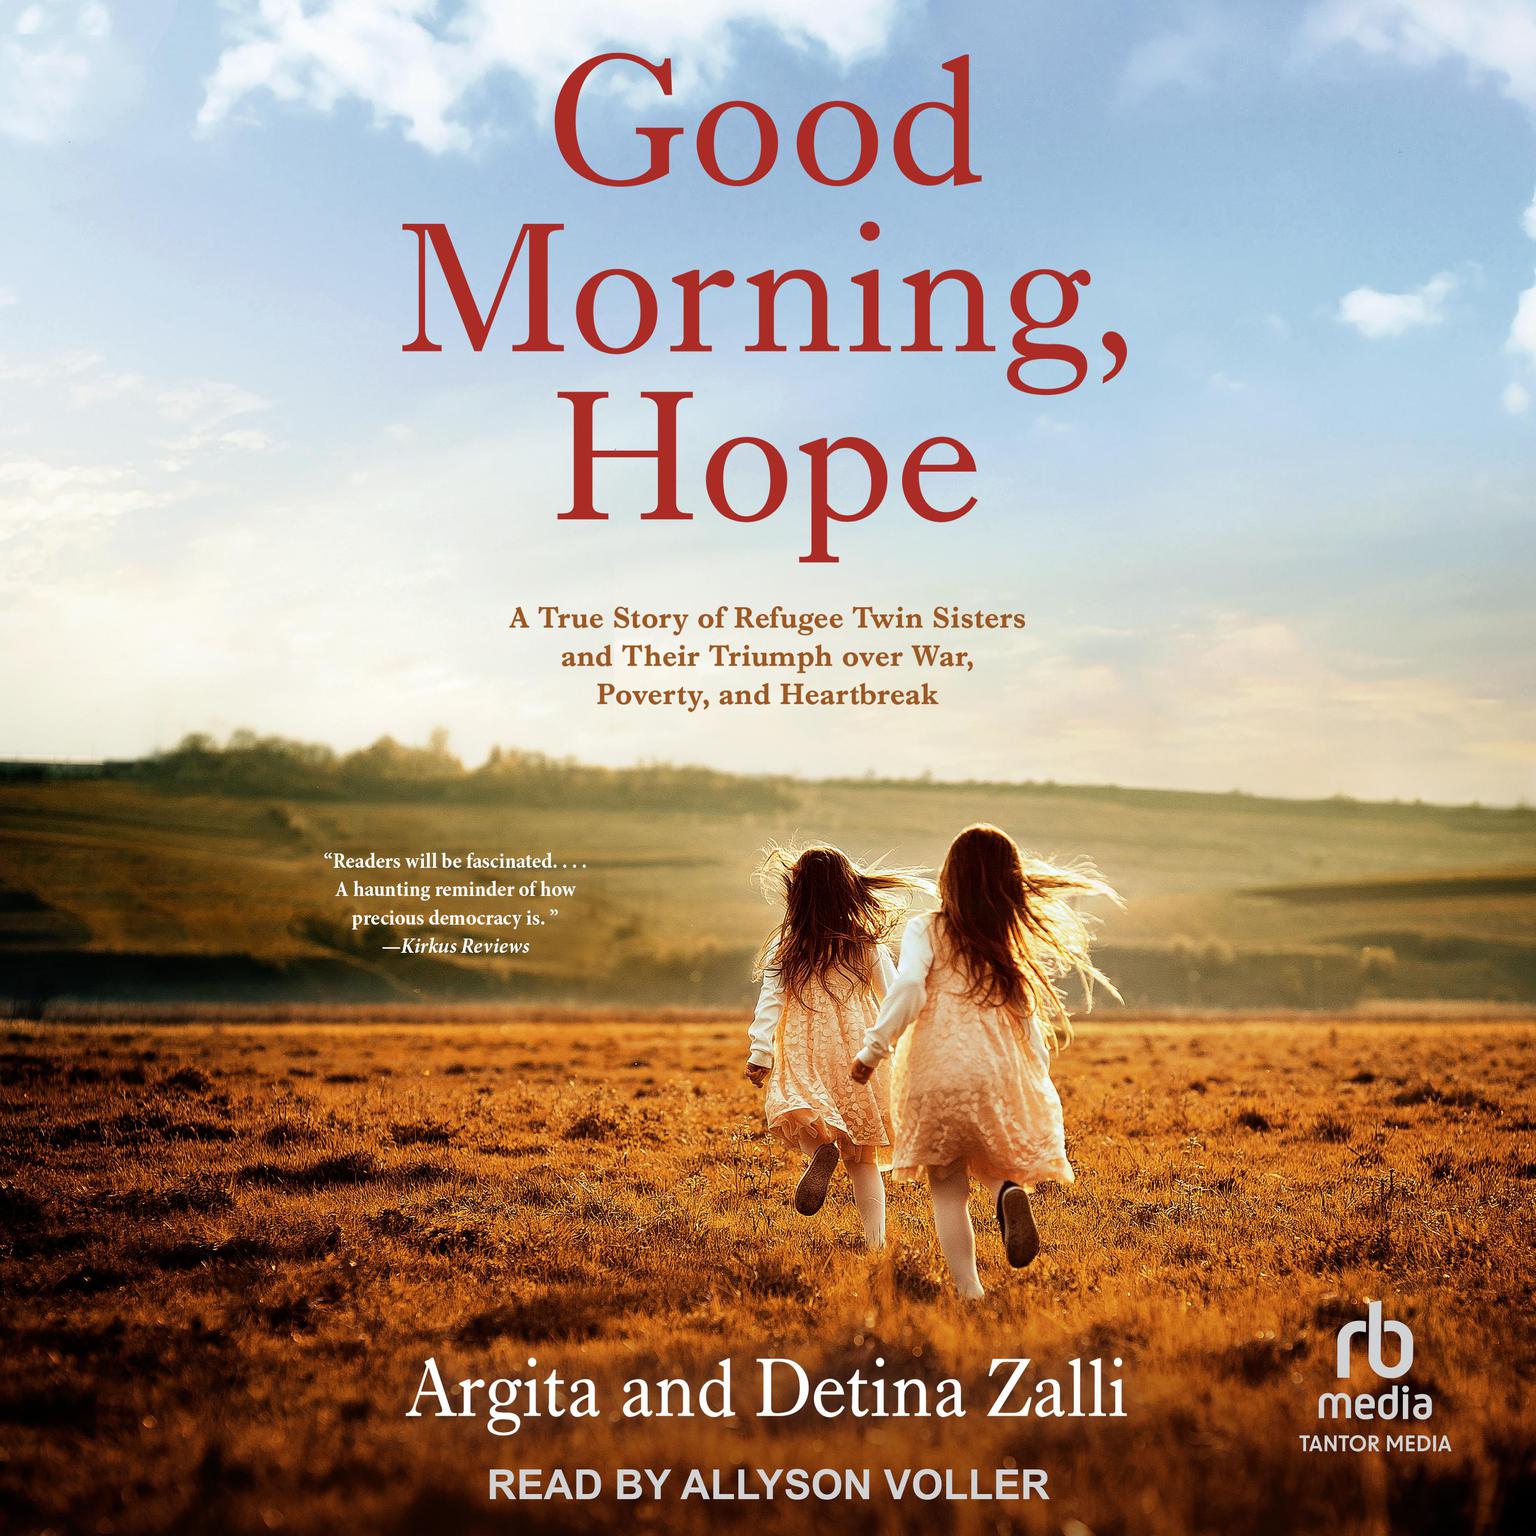 Good Morning, Hope: A True Story of Refugee Twin Sisters and Their Triumph over War, Poverty, and Heartbreak Audiobook, by Argita Zalli